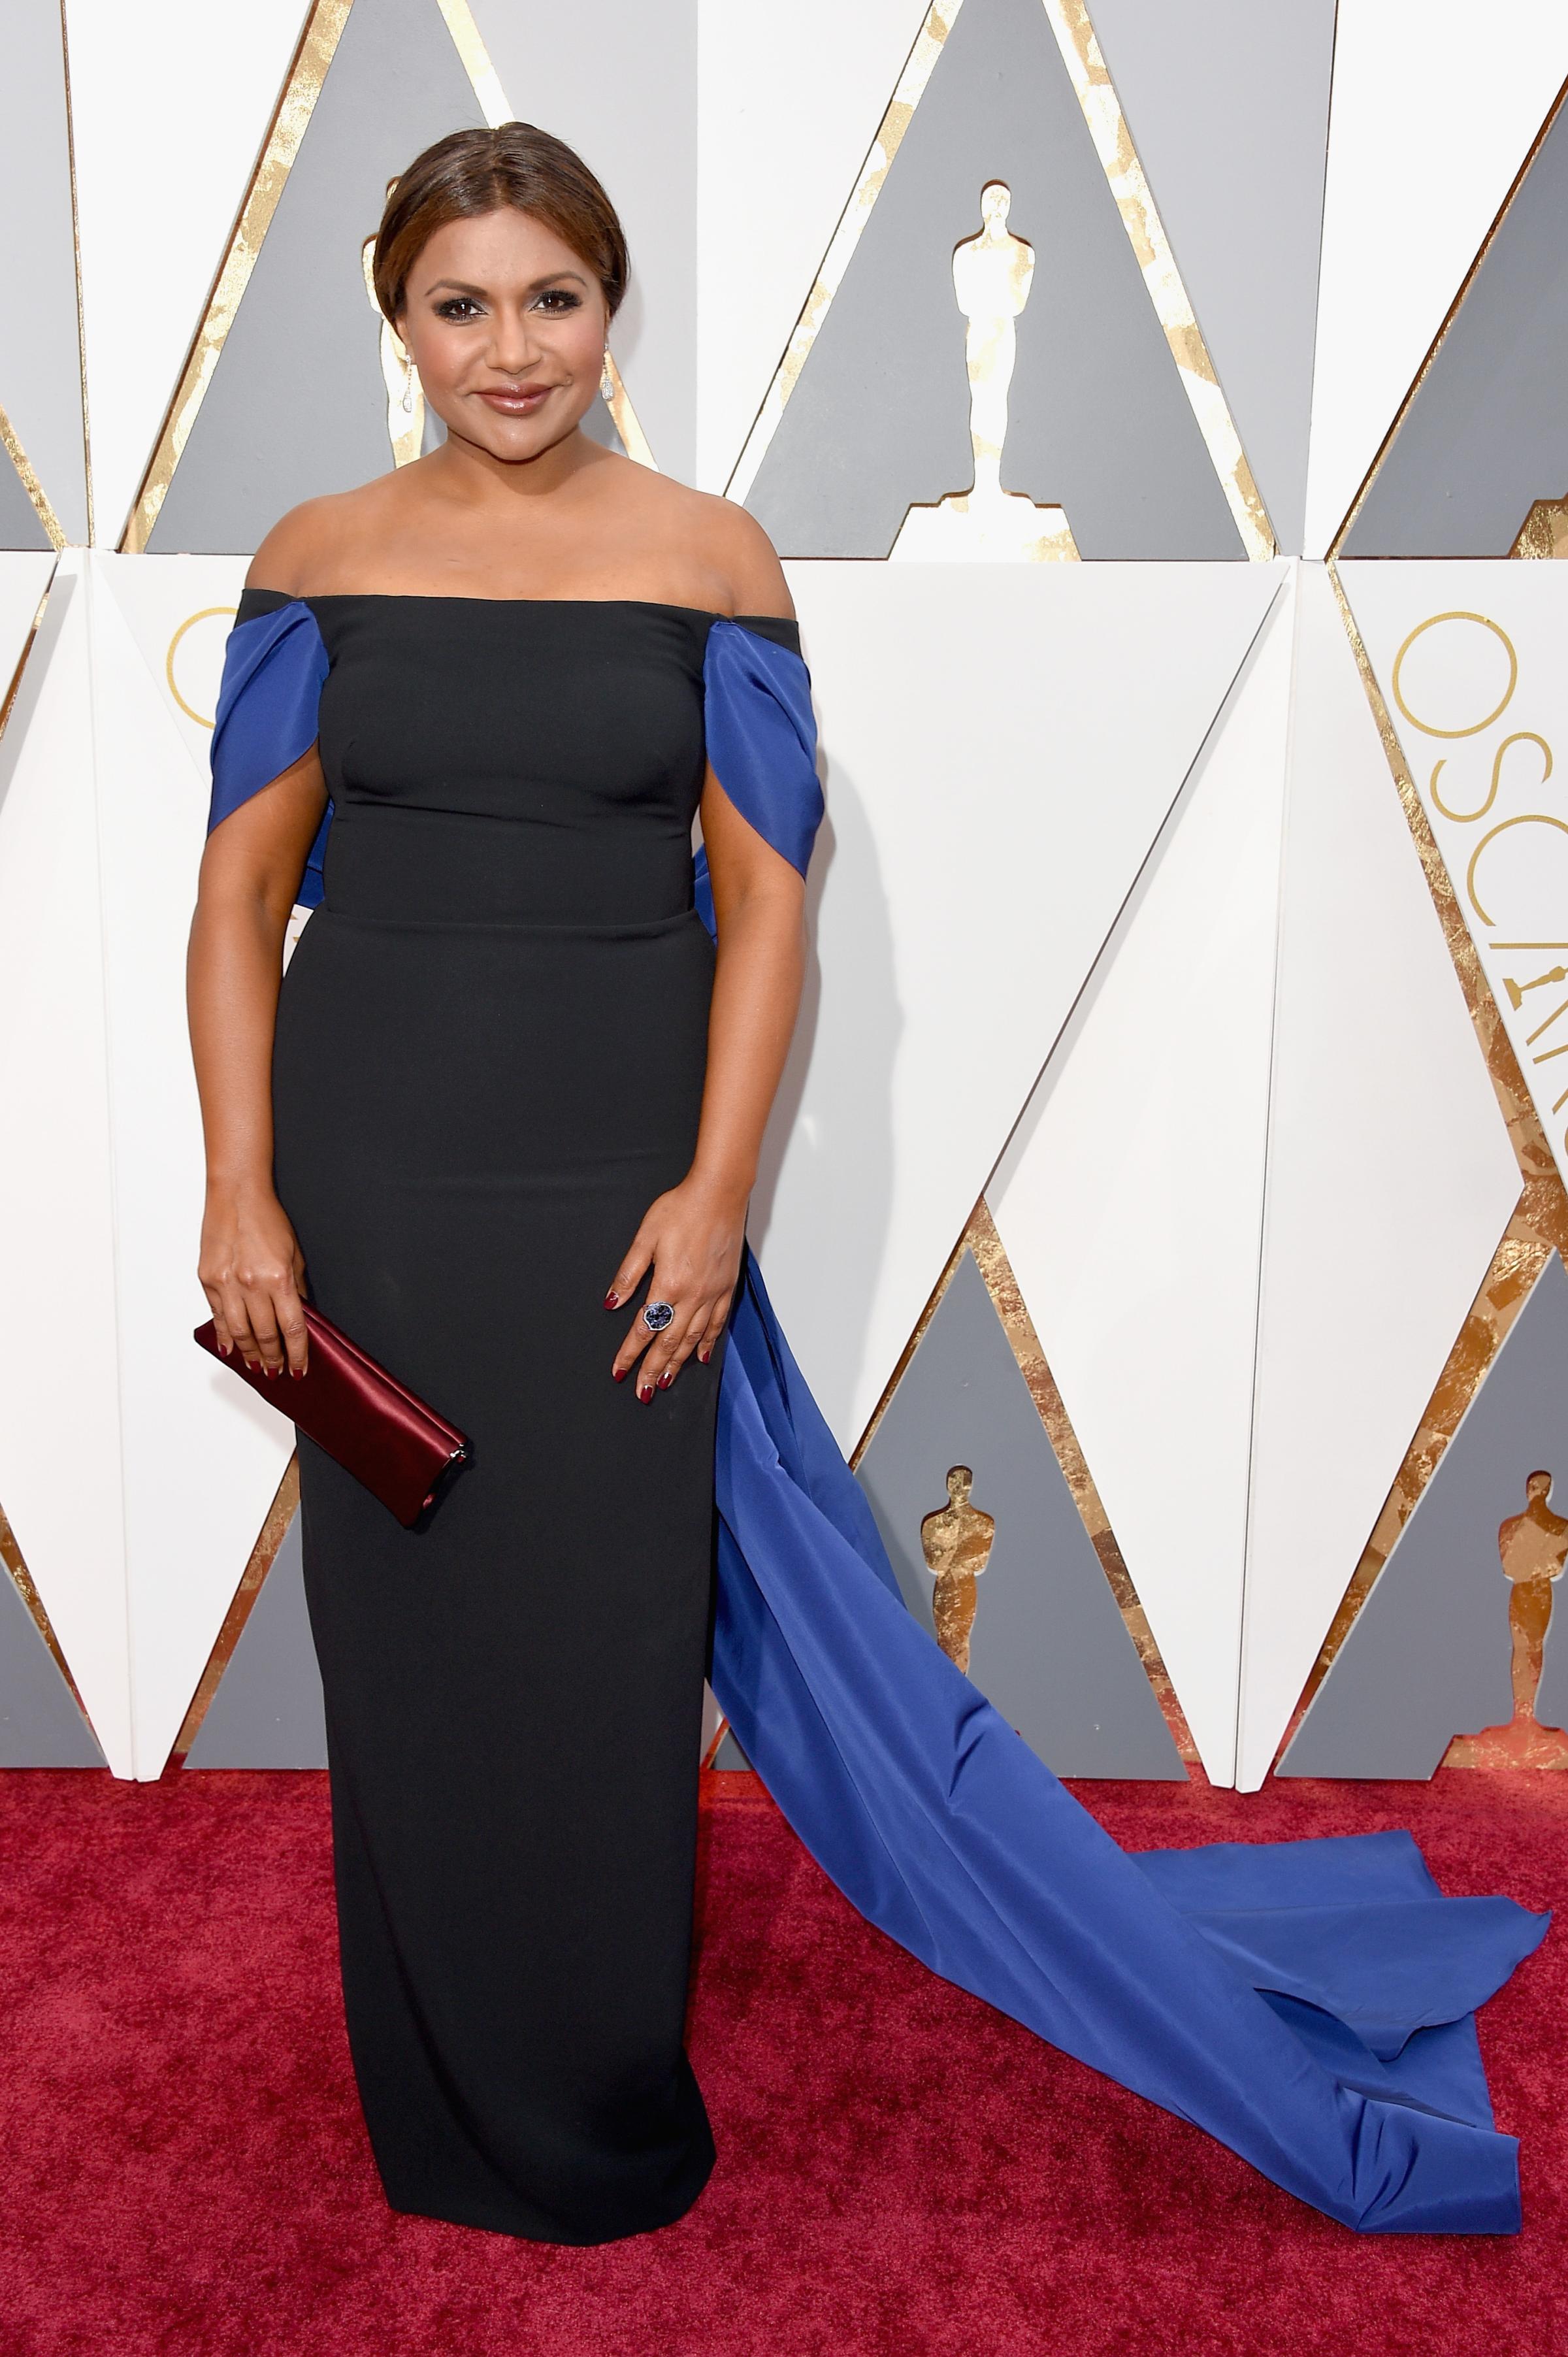 Mindy Kaling attends the 88th Annual Academy Awards on Feb. 28, 2016 in Hollywood, Calif.